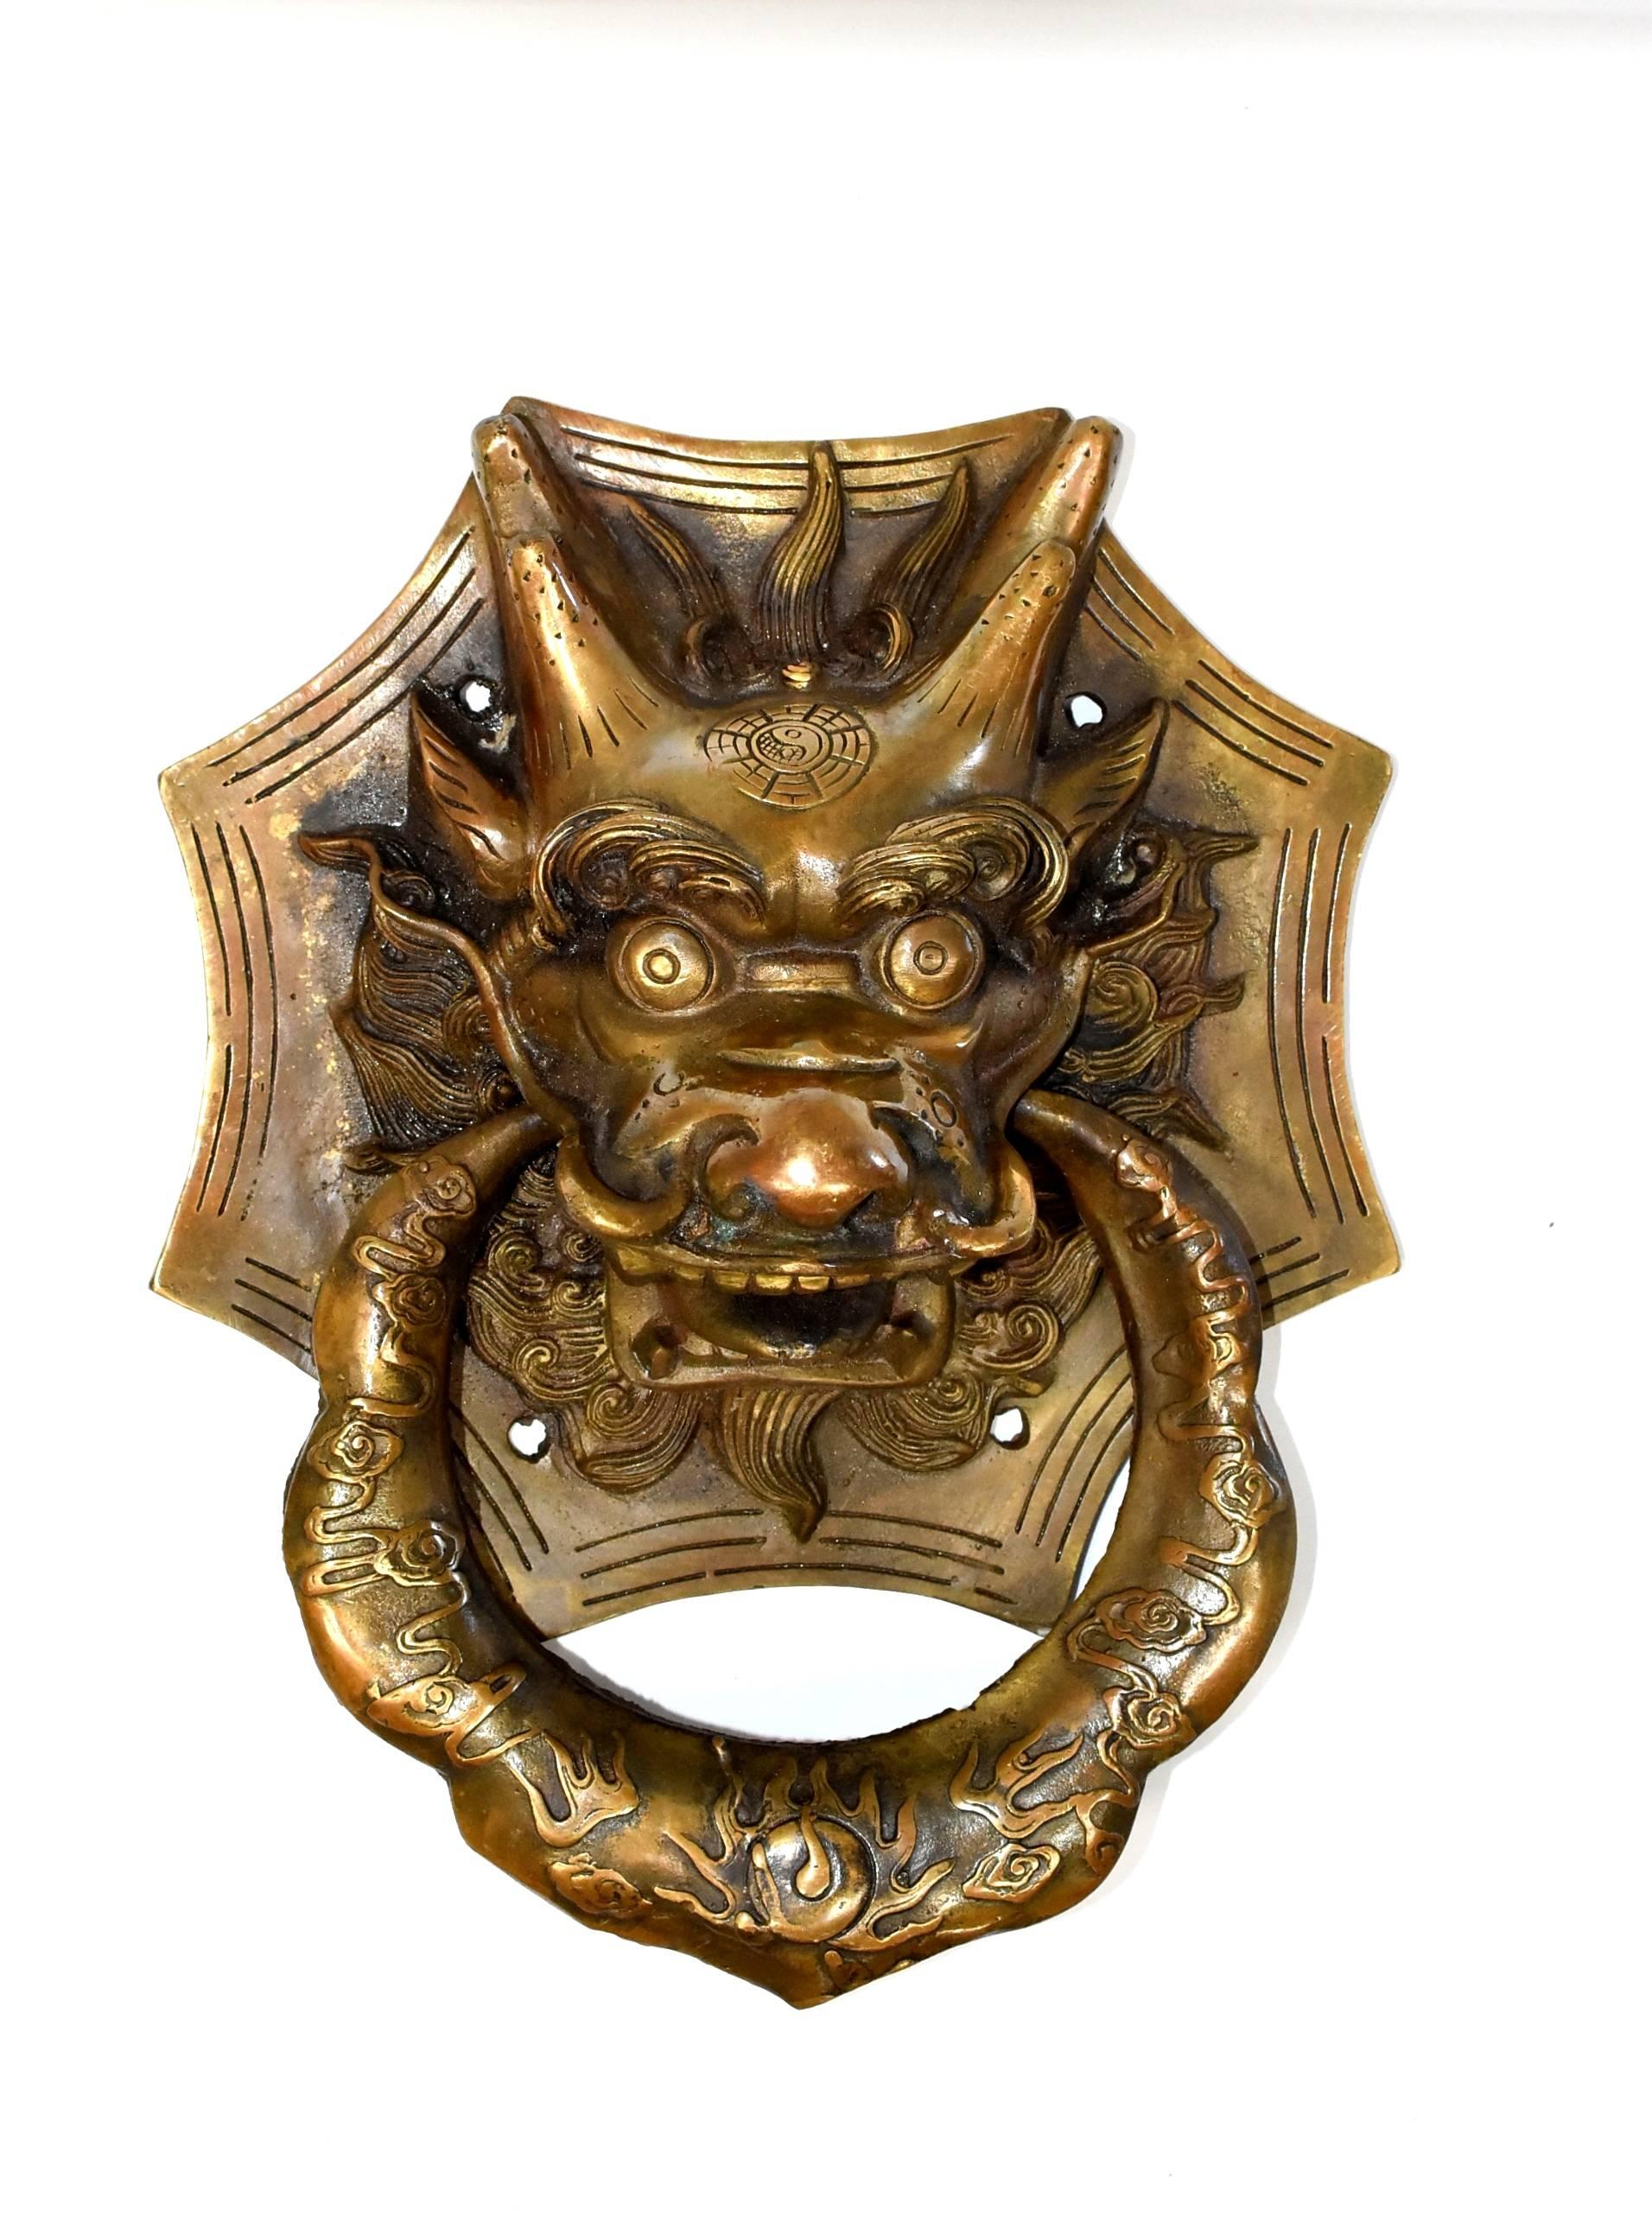 Last Small Pair left in our discontinued inventory. Our brass knockers can be used as door knockers or hand towel rings. Fine craftsmanship depicts the ancient mythical animals with a high level of artistic expression. Dragon is the symbol of